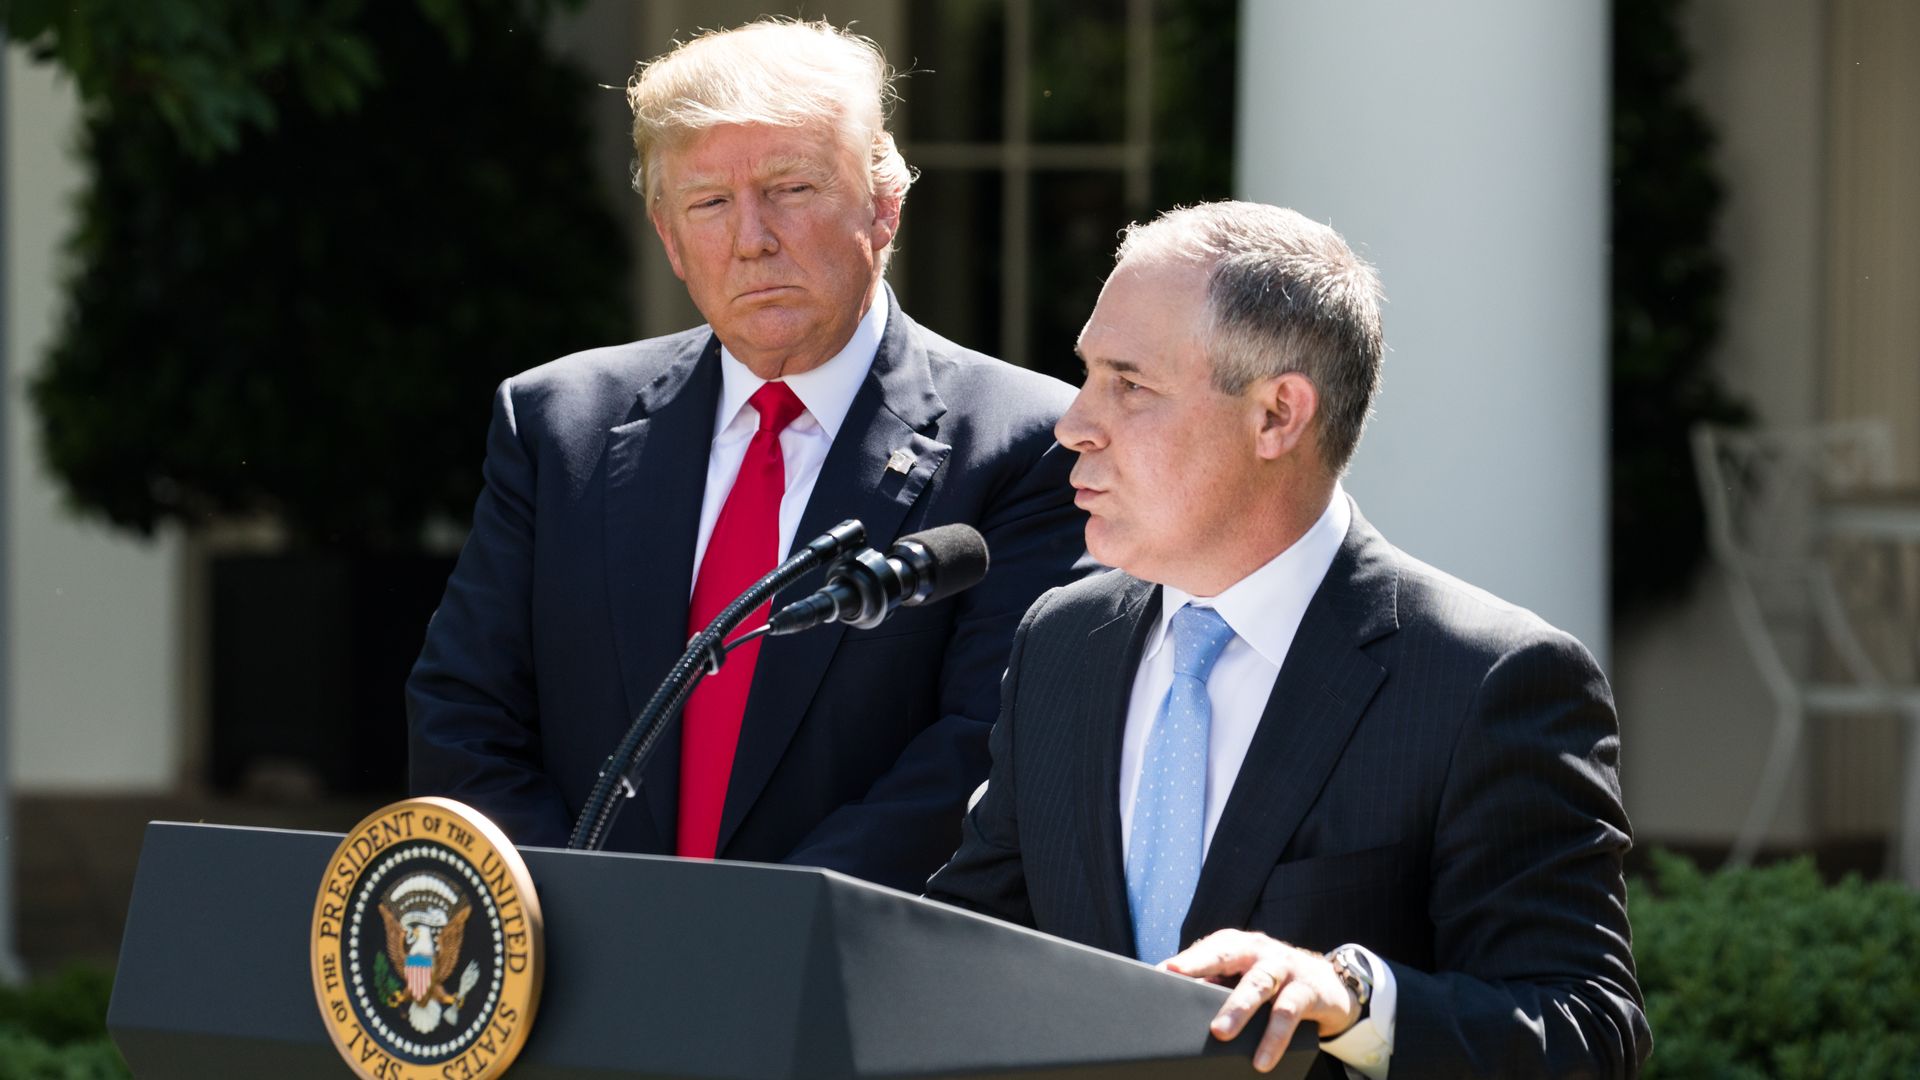 Trump looks at Pruitt with some side eye as Pruitt speaks at the White House